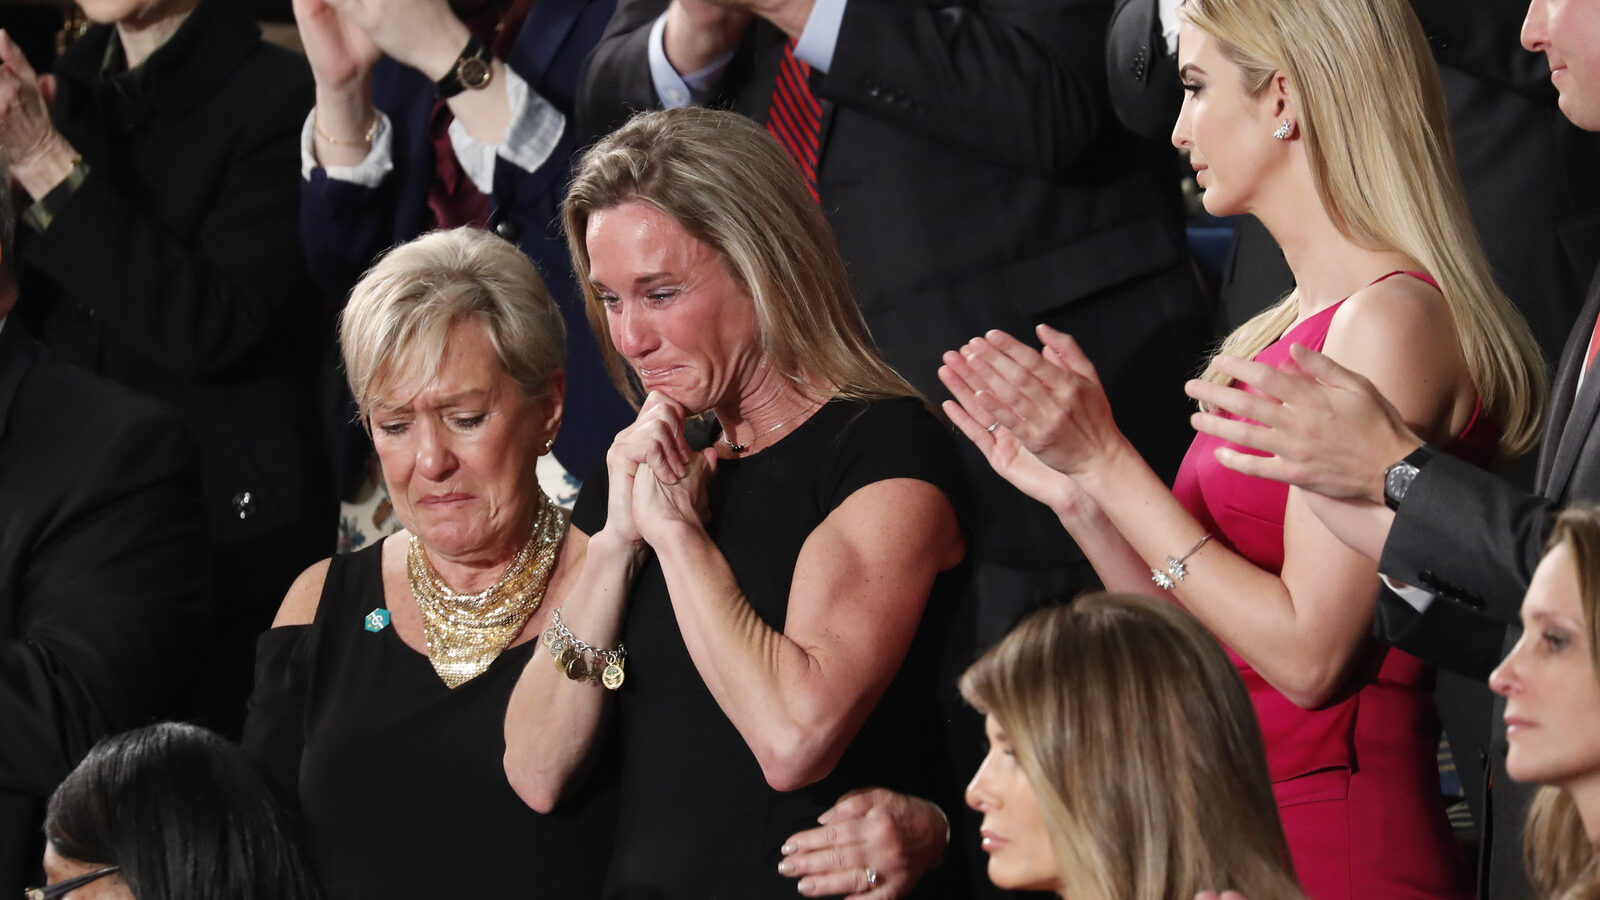 An emotional Carryn Owens, widow of widow of Chief Special Warfare Operator William “Ryan” Owens, who was killed in the botched raid in Yemen, as she was acknowledged by President Donald Trump during his address to a joint session of Congress. (AP/Pablo Martinez Monsivais)